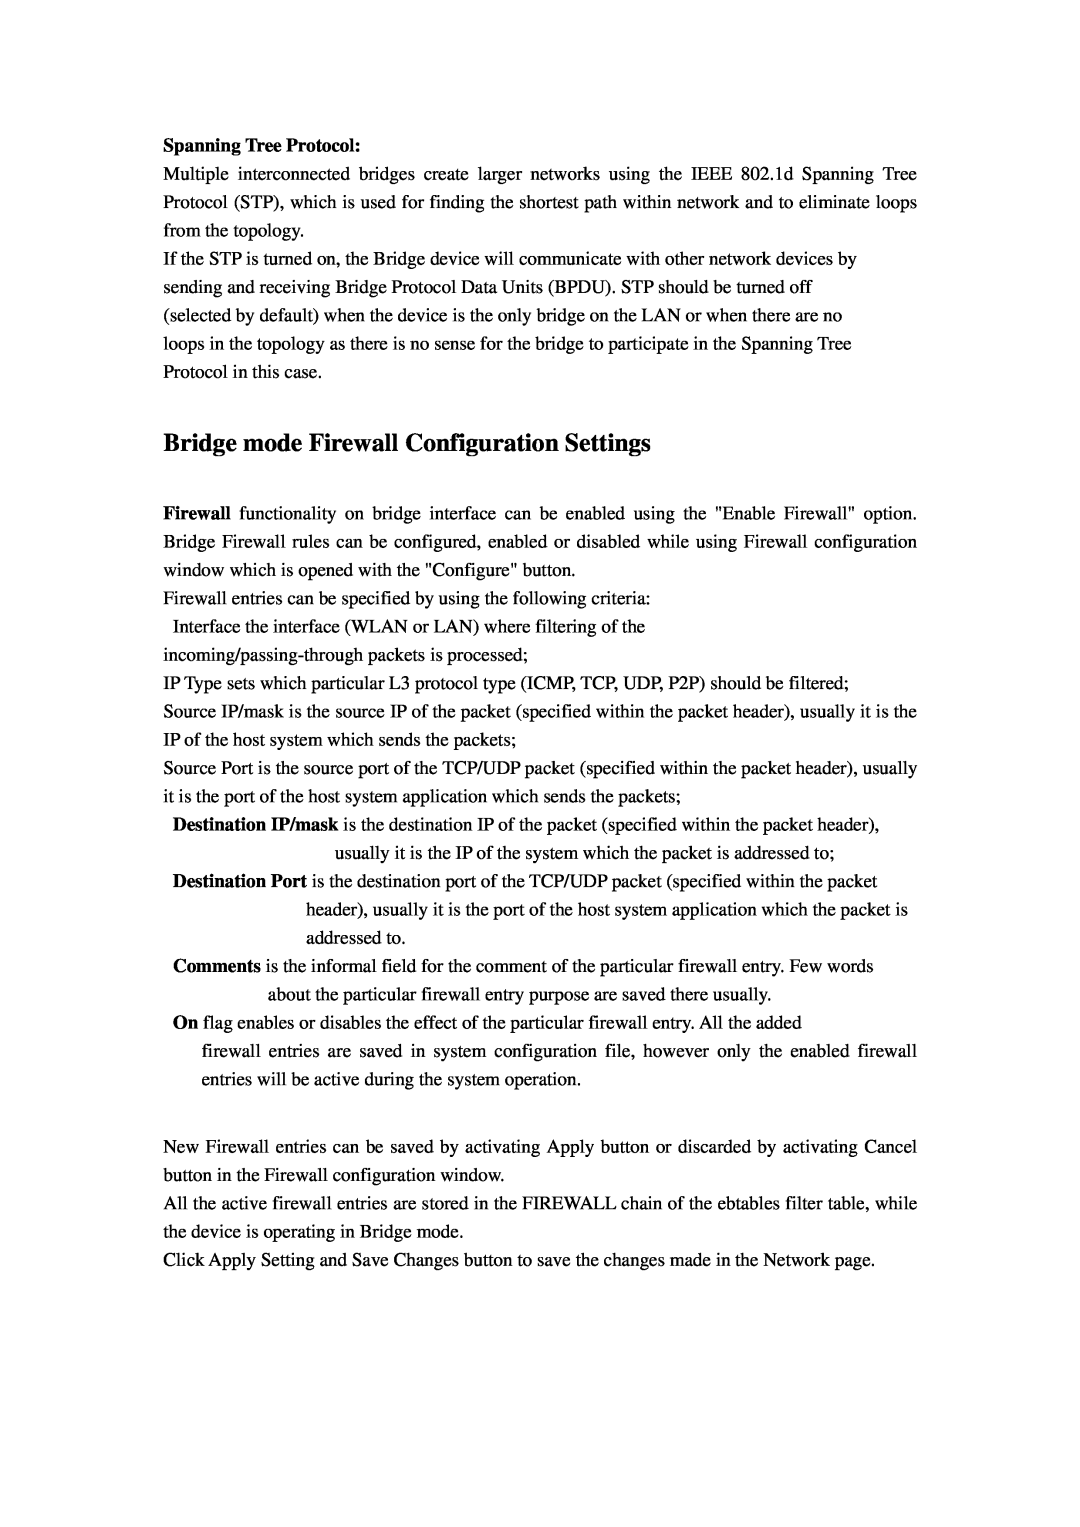 Compex Systems 802.11N manual Bridge mode Firewall Configuration Settings, Spanning Tree Protocol 